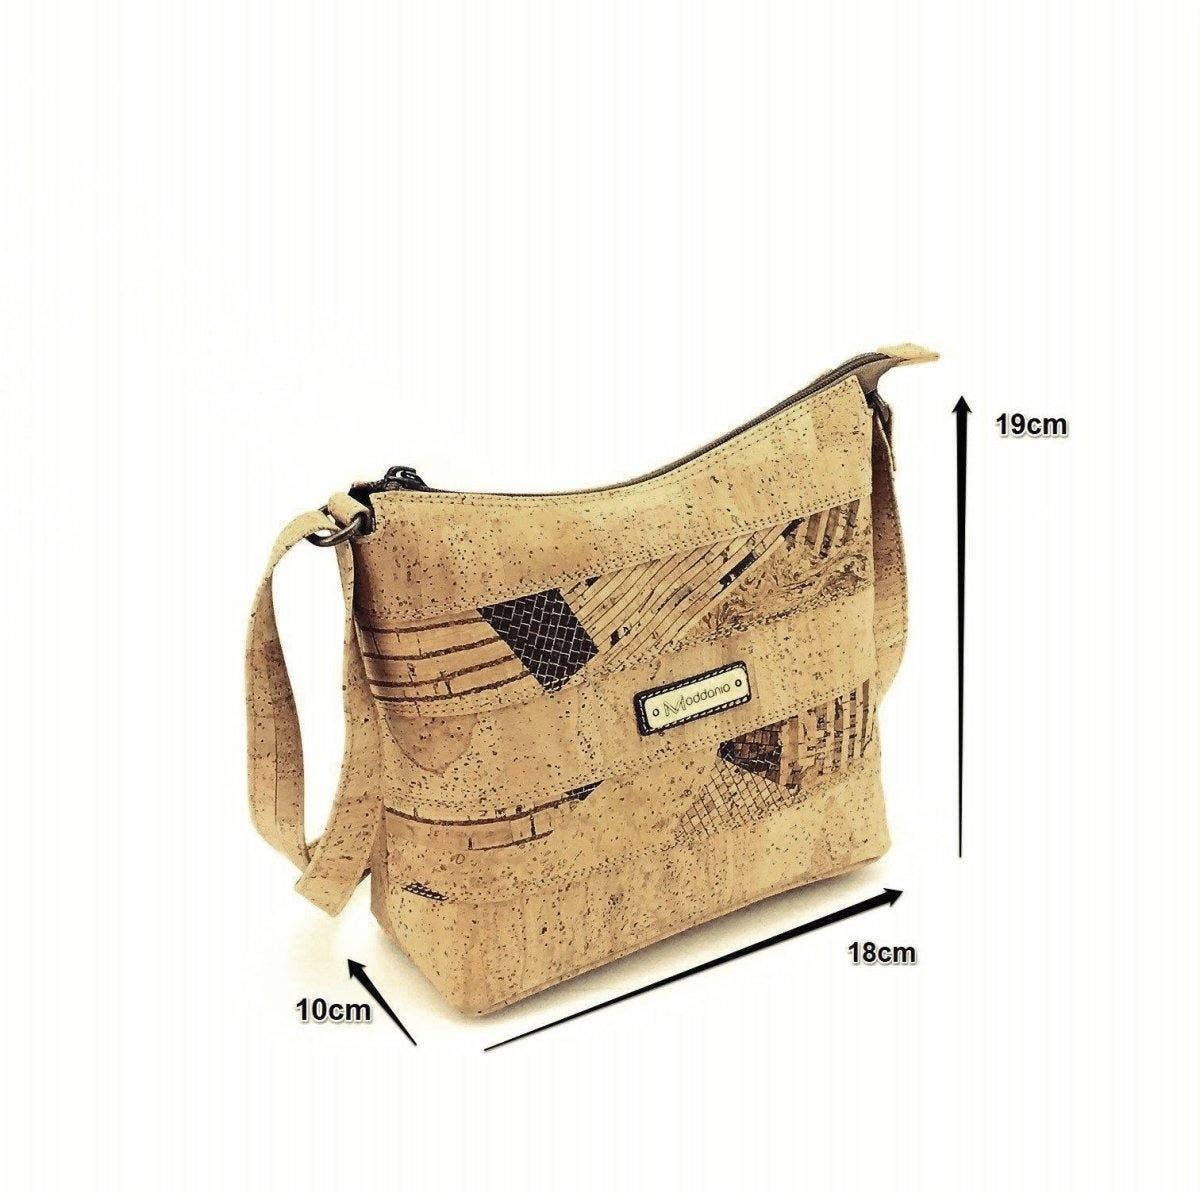 Cork Crossbody Bag and Vegan Purse for Women in Natural Mix